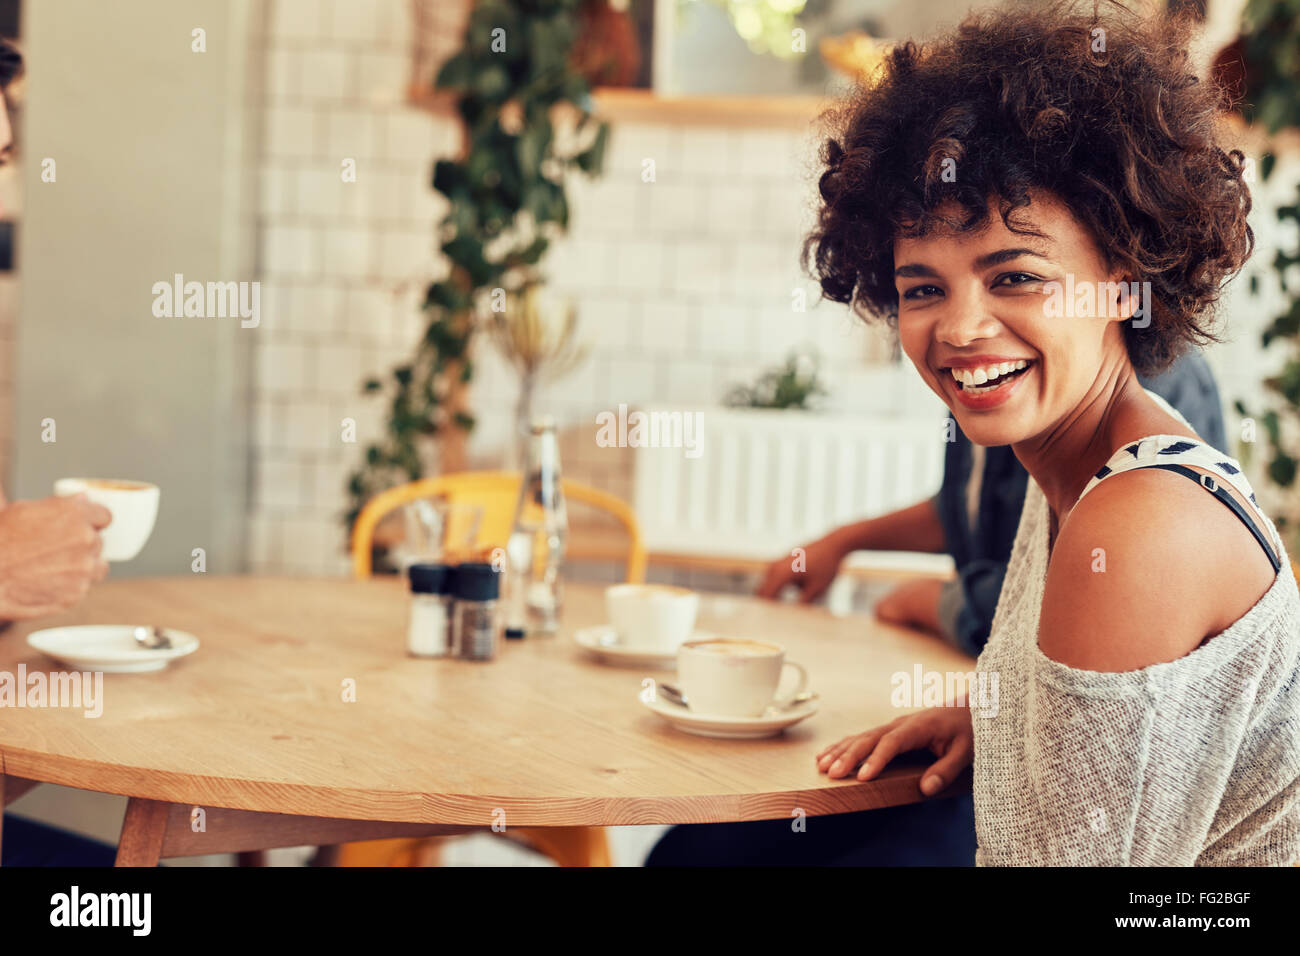 Portrait of cheerful young woman sitting at a cafe table with friends in background Stock Photo